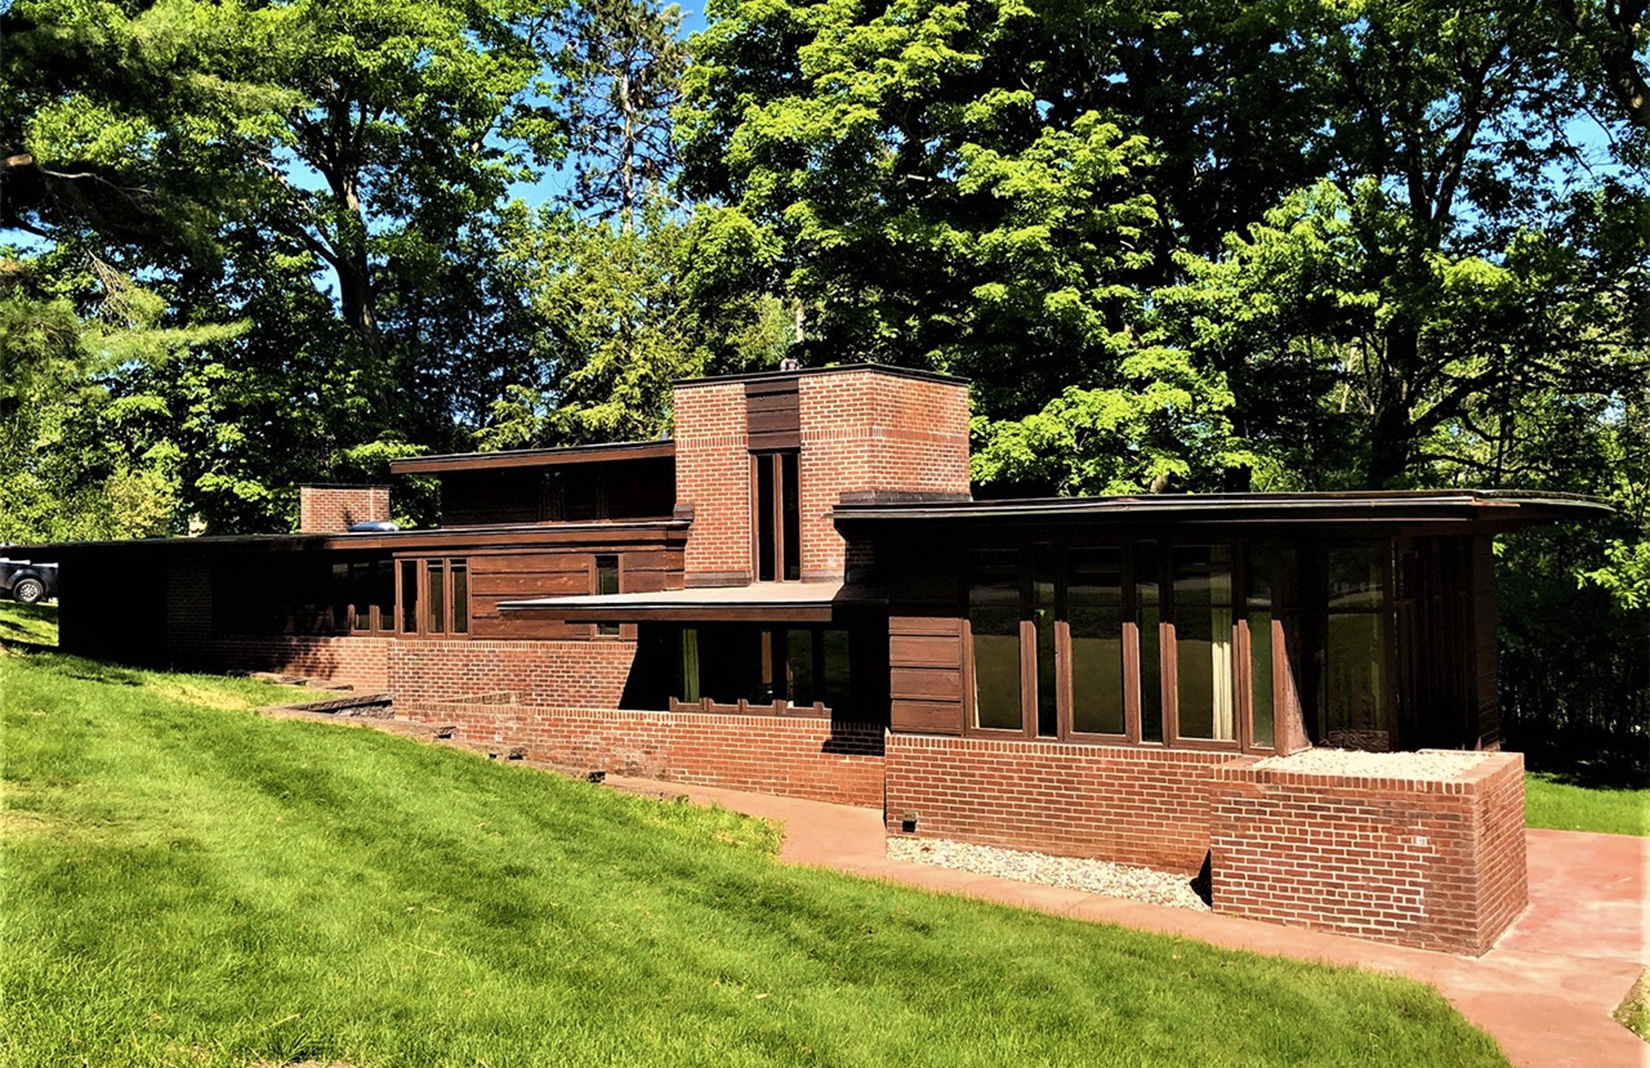 Charles Manson House by Frank Lloyd Wright for sale in Wisconsin